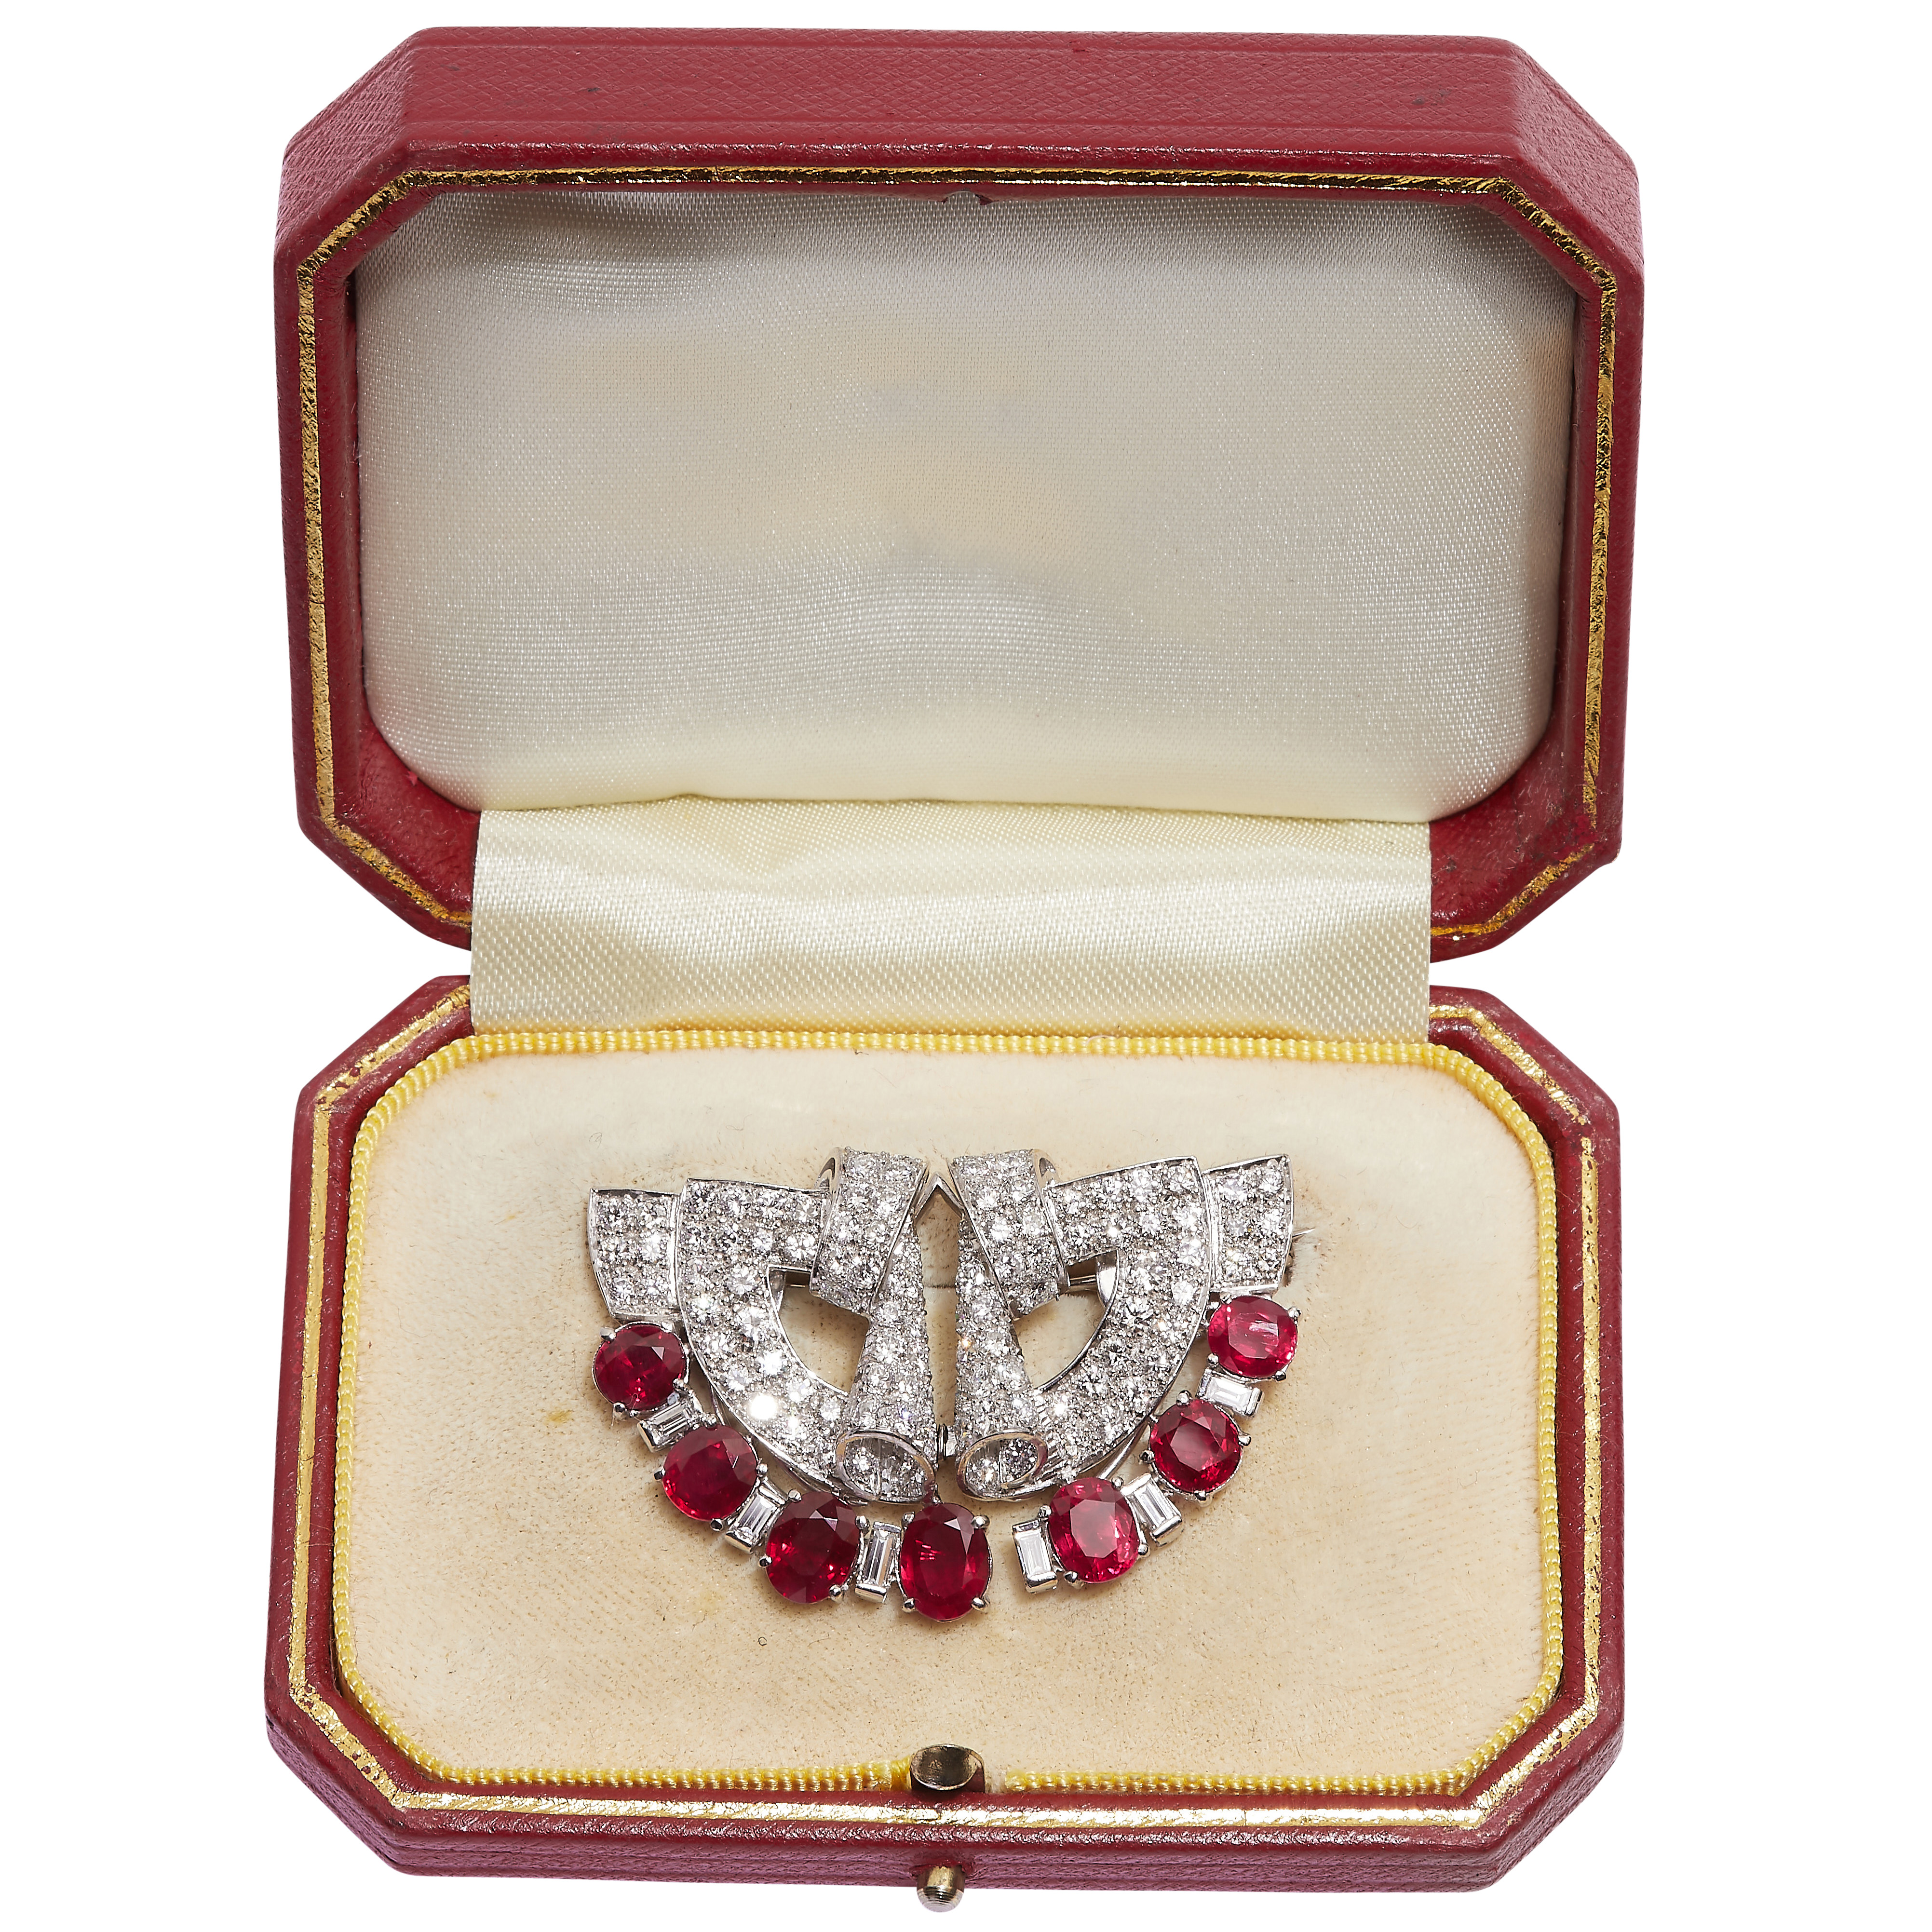 IMPORTANT ART-DECO BURMA 'MONG HSU' RUBY AND DIAMOND DOUBLE CLIP BROOCH - Image 2 of 2